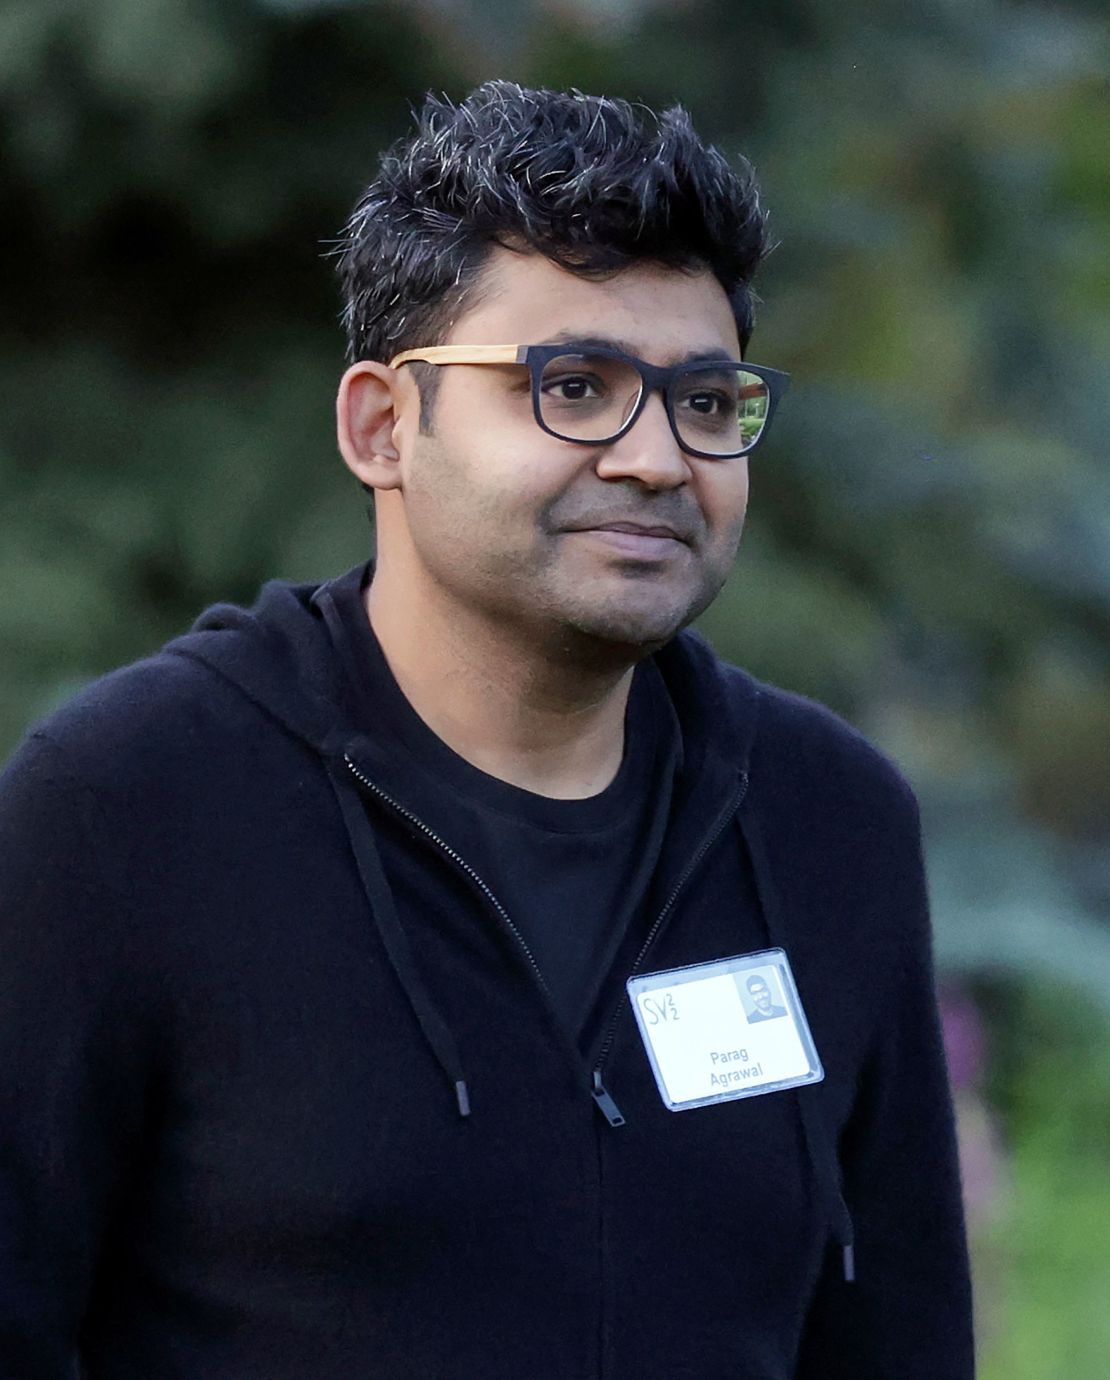 Parag Agrawal, Twitter's former chief technology officer, was made CEO after Jack Dorsey stepped down last November.